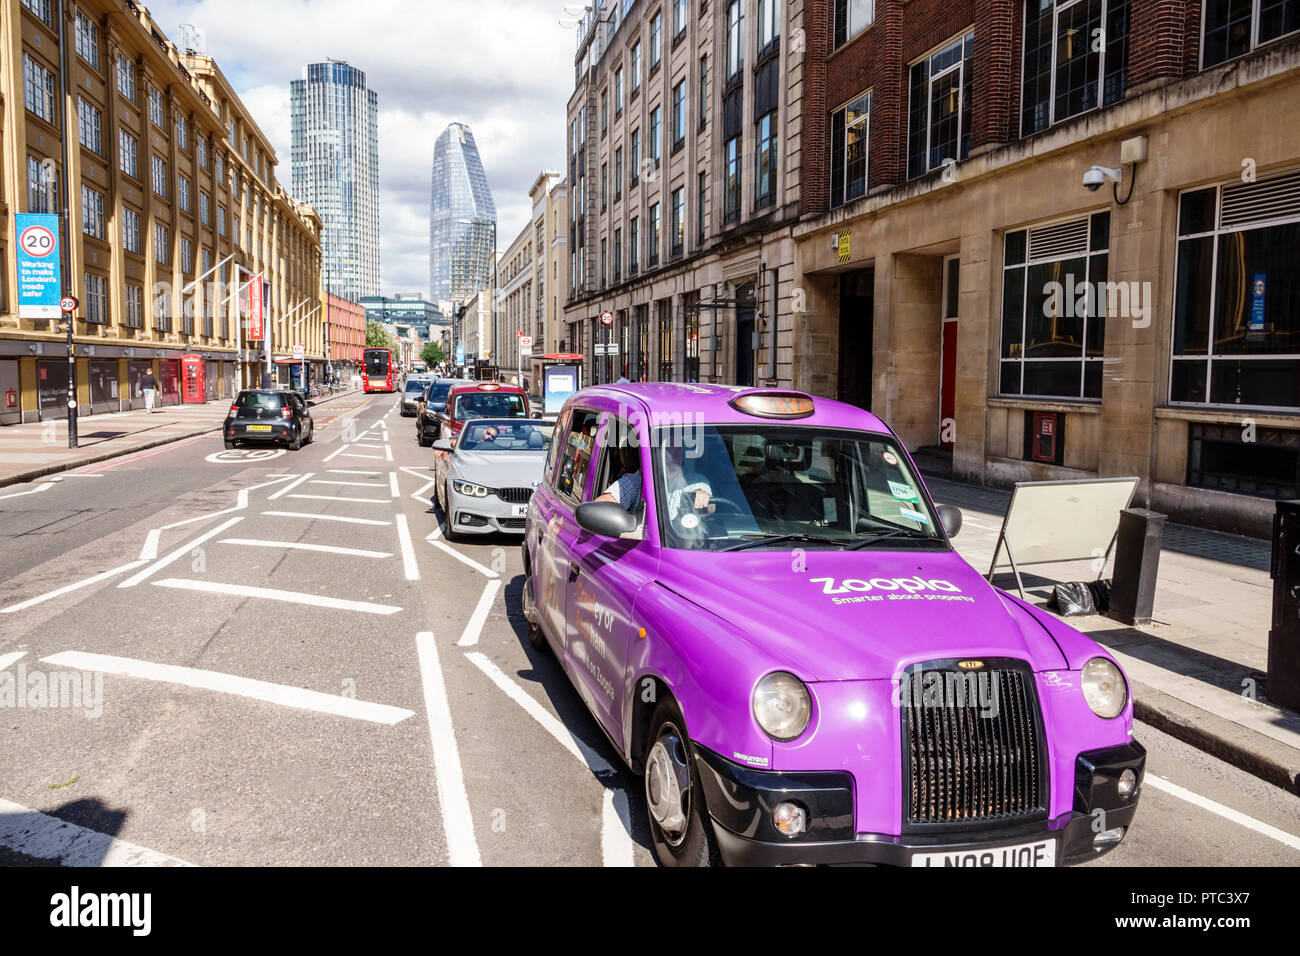 Londres Angleterre,Royaume-Uni,Lambeth South Bank,Stamford Street,trafic,voitures,taxi,signalisation routière, Zoopla,annonce publicitaire,voiture Wrap,violet,UK GB Engl Banque D'Images